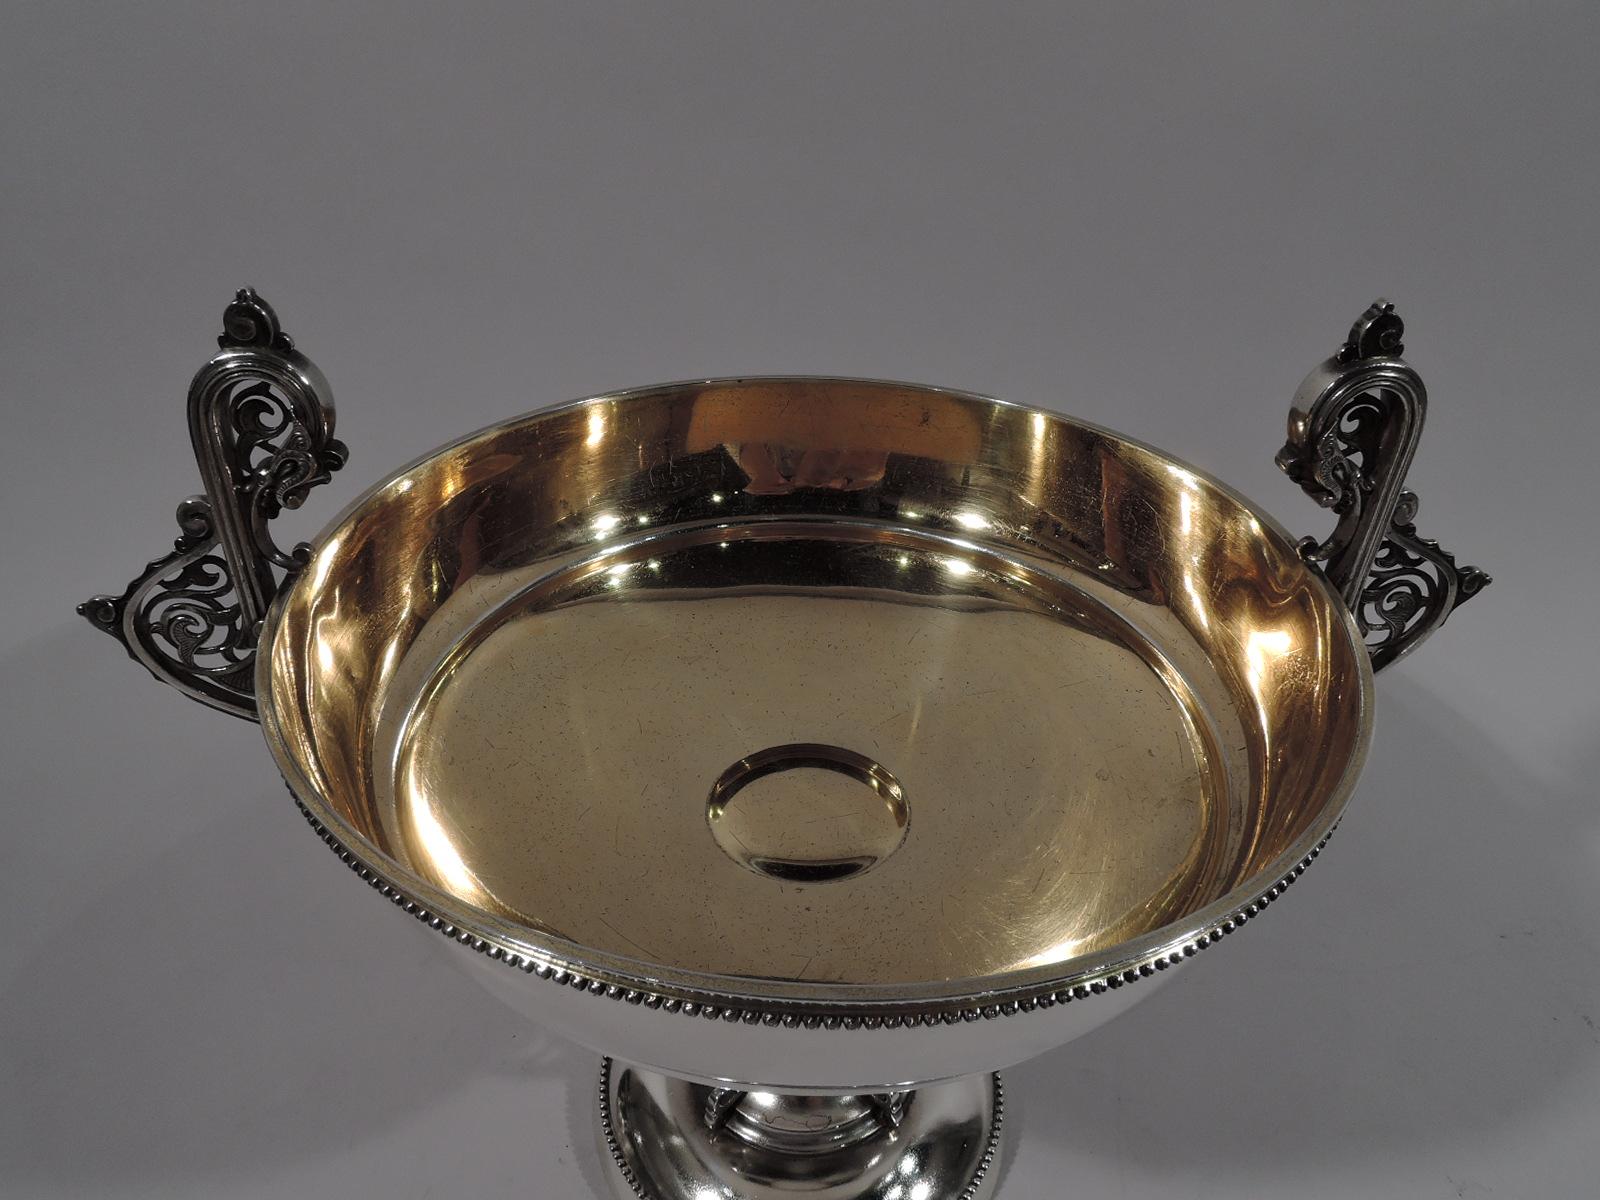 Aesthetic Movement Rare Tiffany Sterling Silver Moresque Classical Kylix Compote